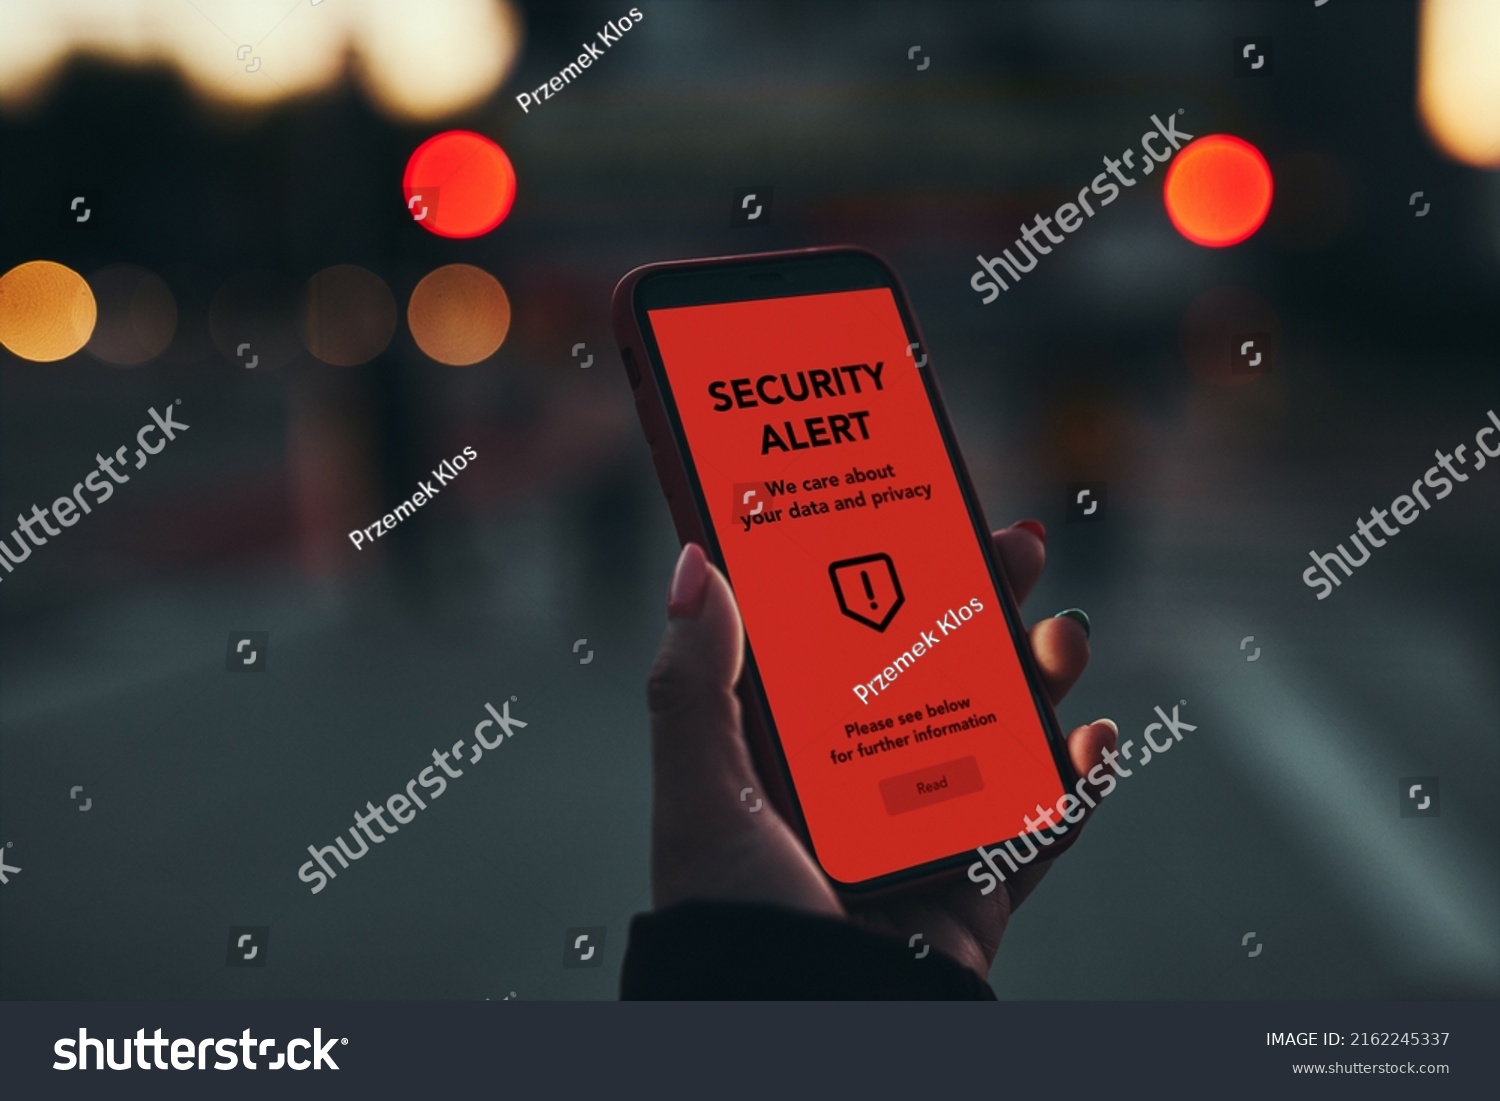 Security alert on smartphone screen. Antivirus warning. Private data protection system notification. Important security issue. Concept of cyber crime, hacking password and bank accounts #2162245337